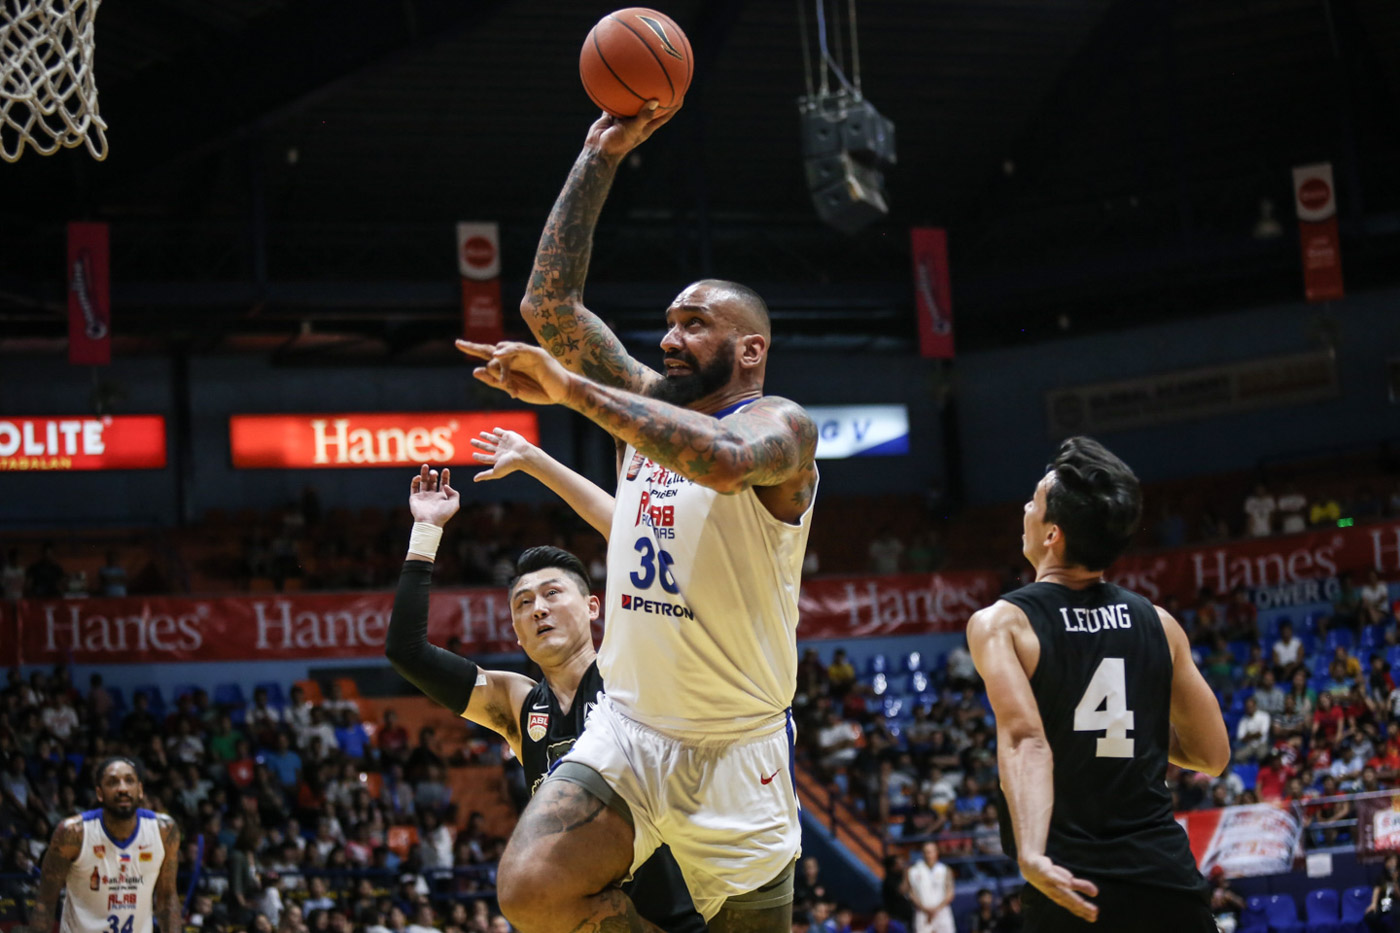 I'm not here to score 50 points per game, says Petron import Balkman